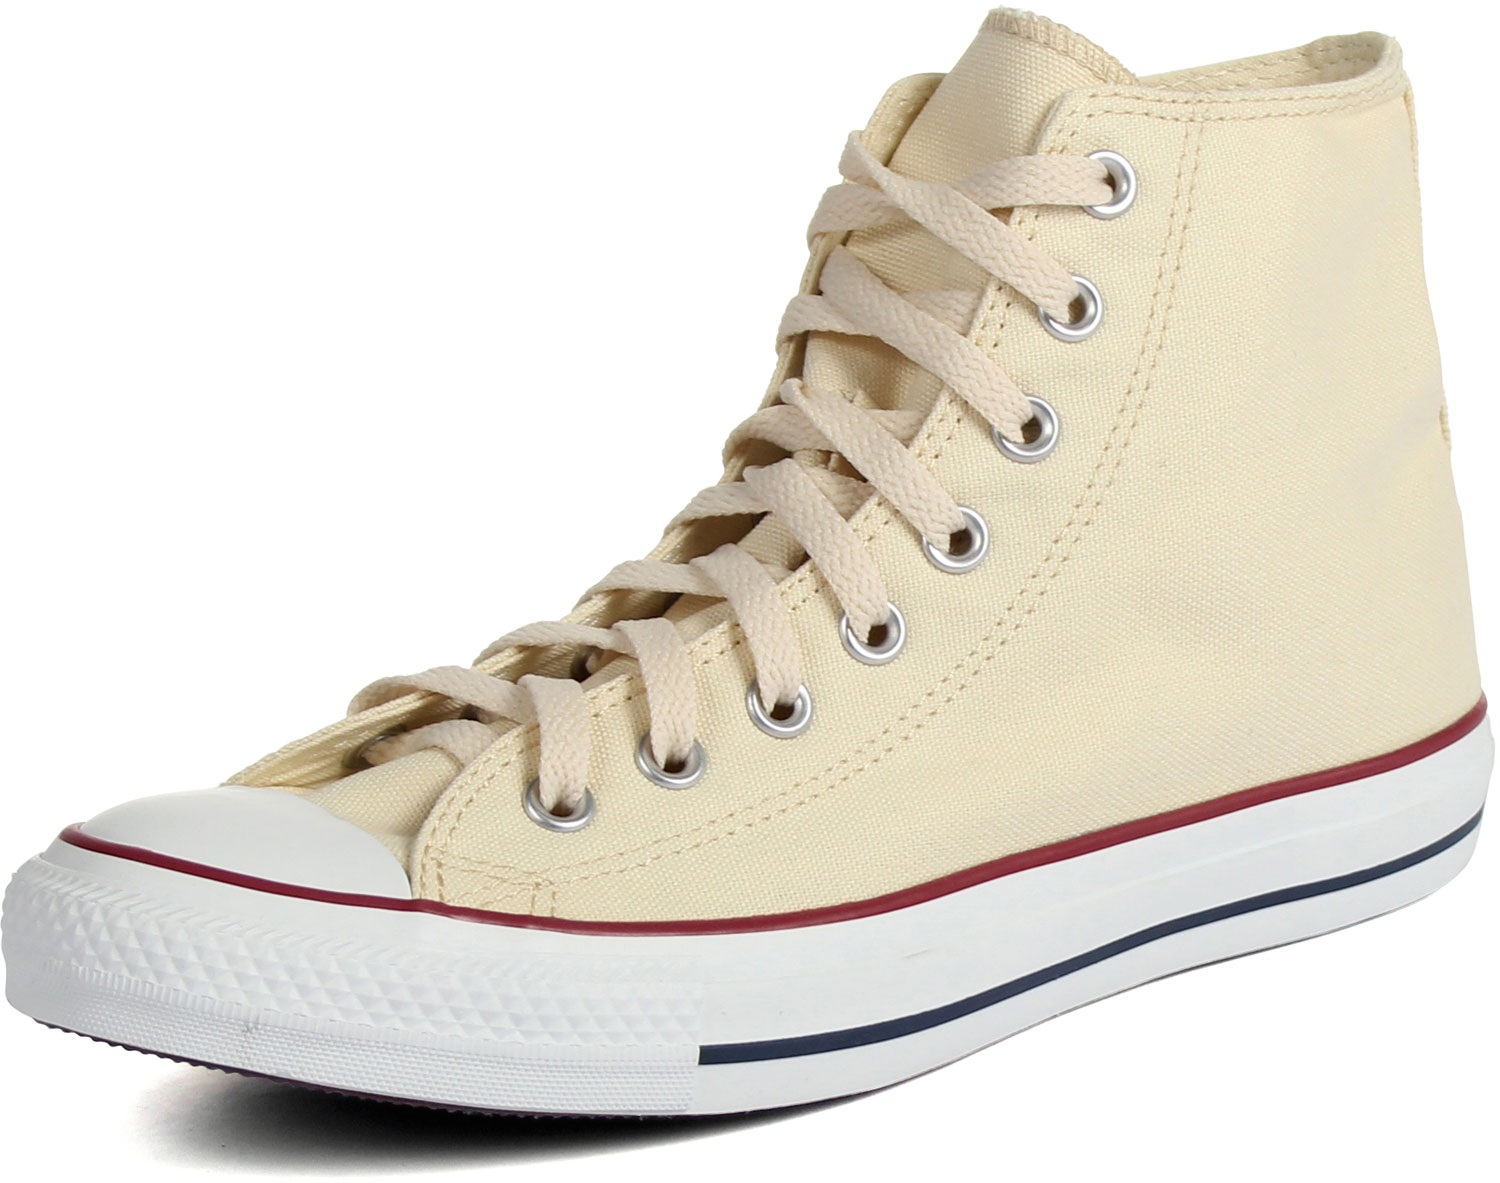 Converse Chuck Taylor All Star Shoes (M9162) Hi top in White